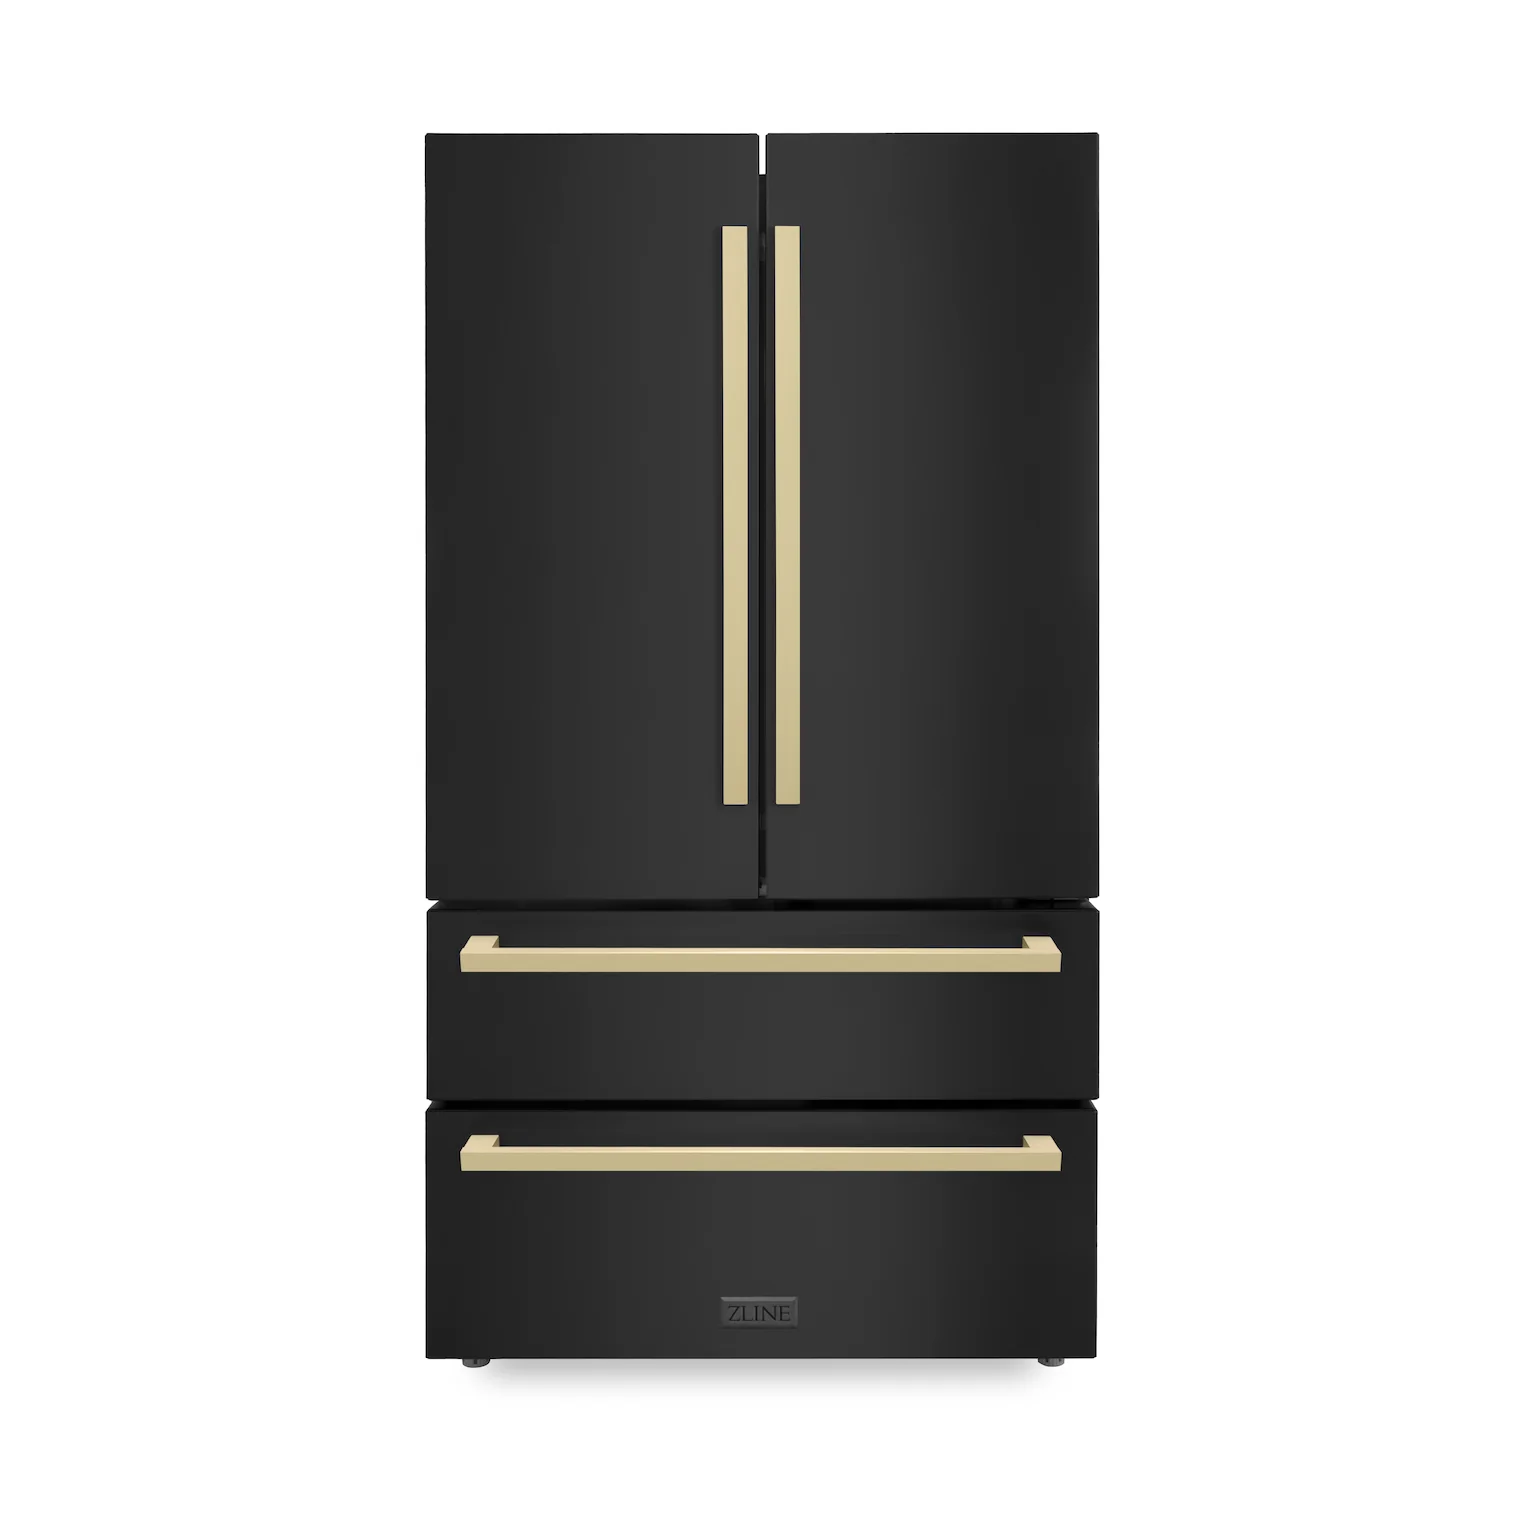 ZLINE 36" Autograph Edition 22.5 cu. ft 4-Door French Door Refrigerator with Ice Maker in Black Stainless Steel with Champagne Bronze Square Handles (RFMZ-36-BS-FCB)